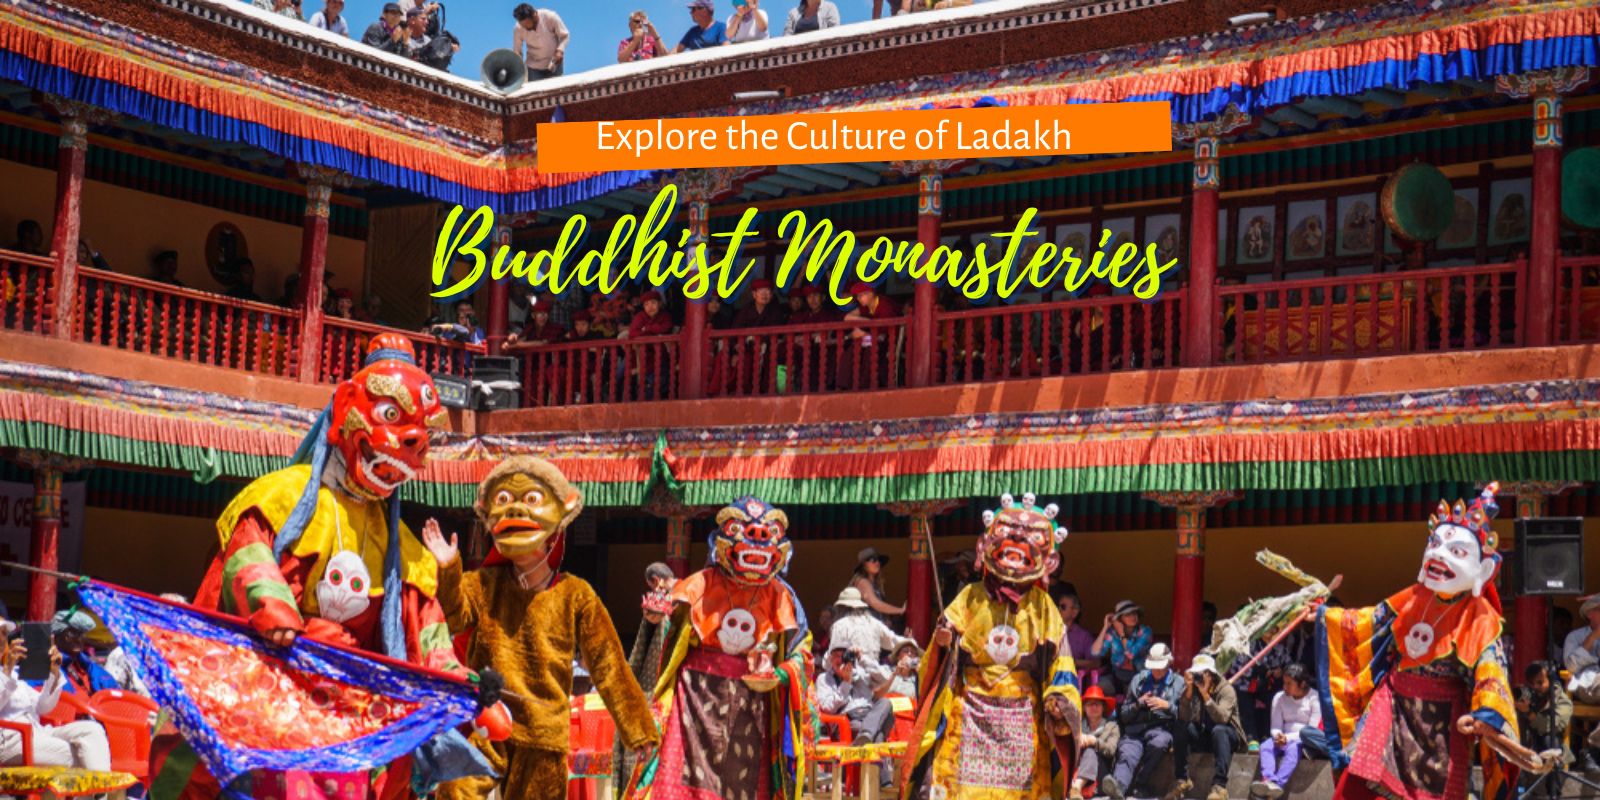 Explore the Culture of Ladakh in These Two Buddhist Monasteries